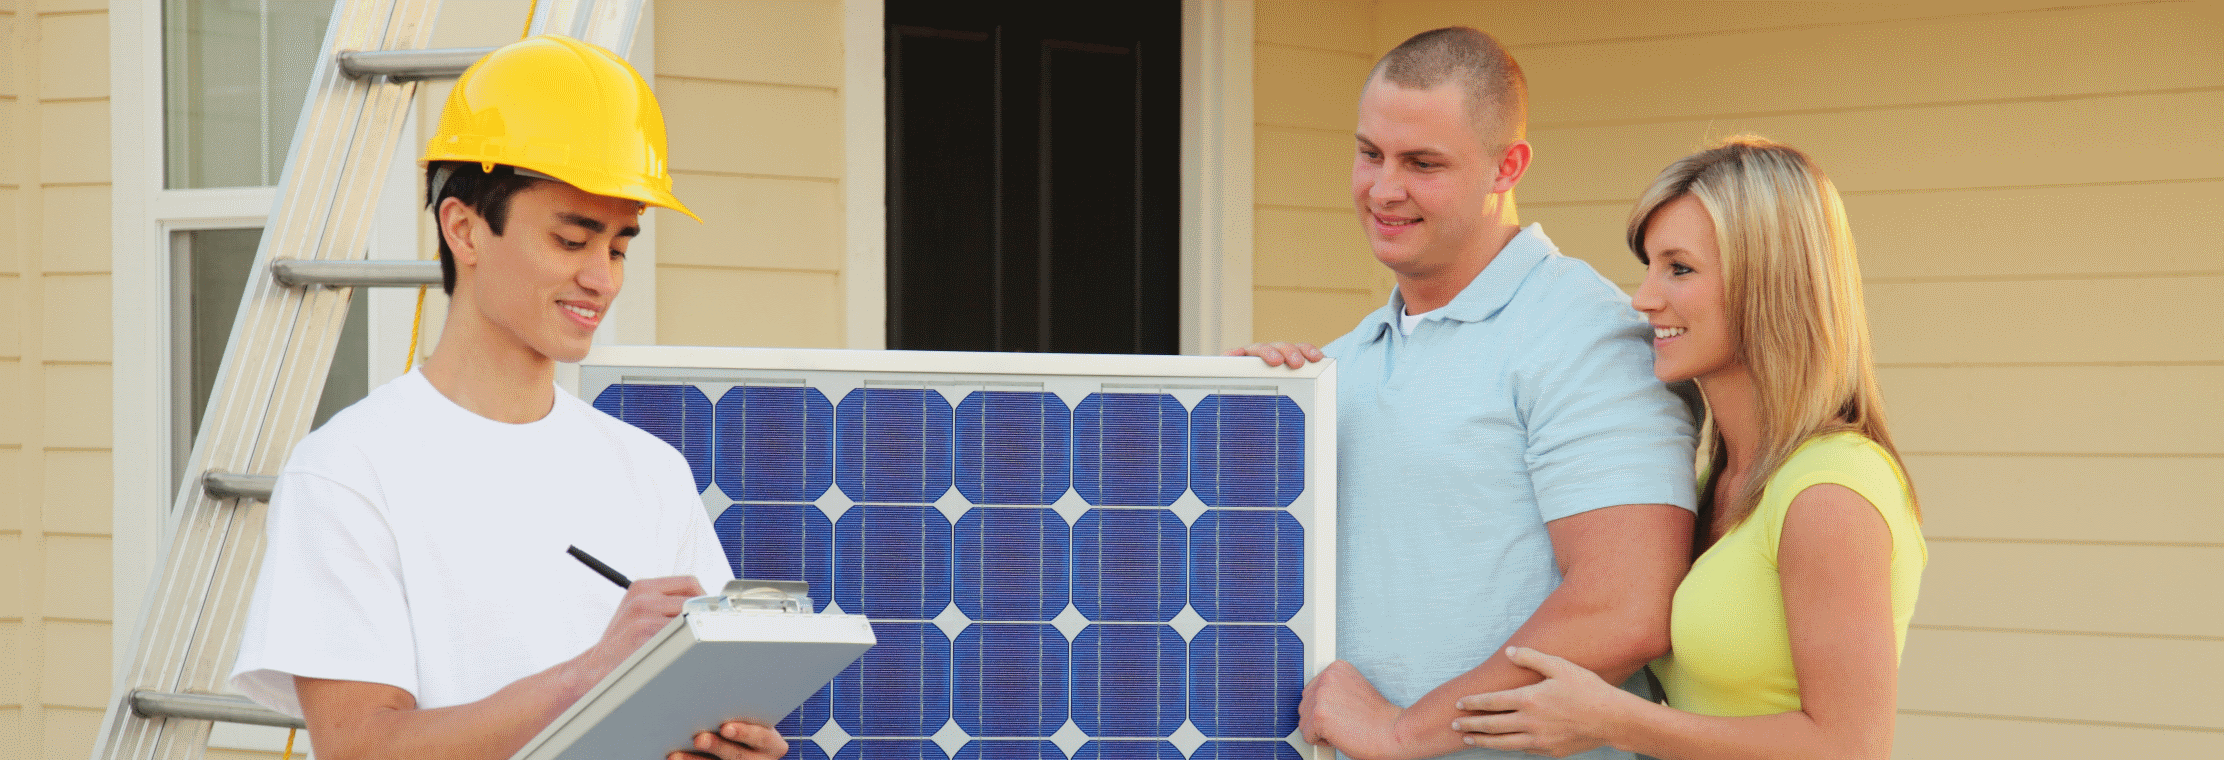 Solar panel installer selling solar panels to homeowners